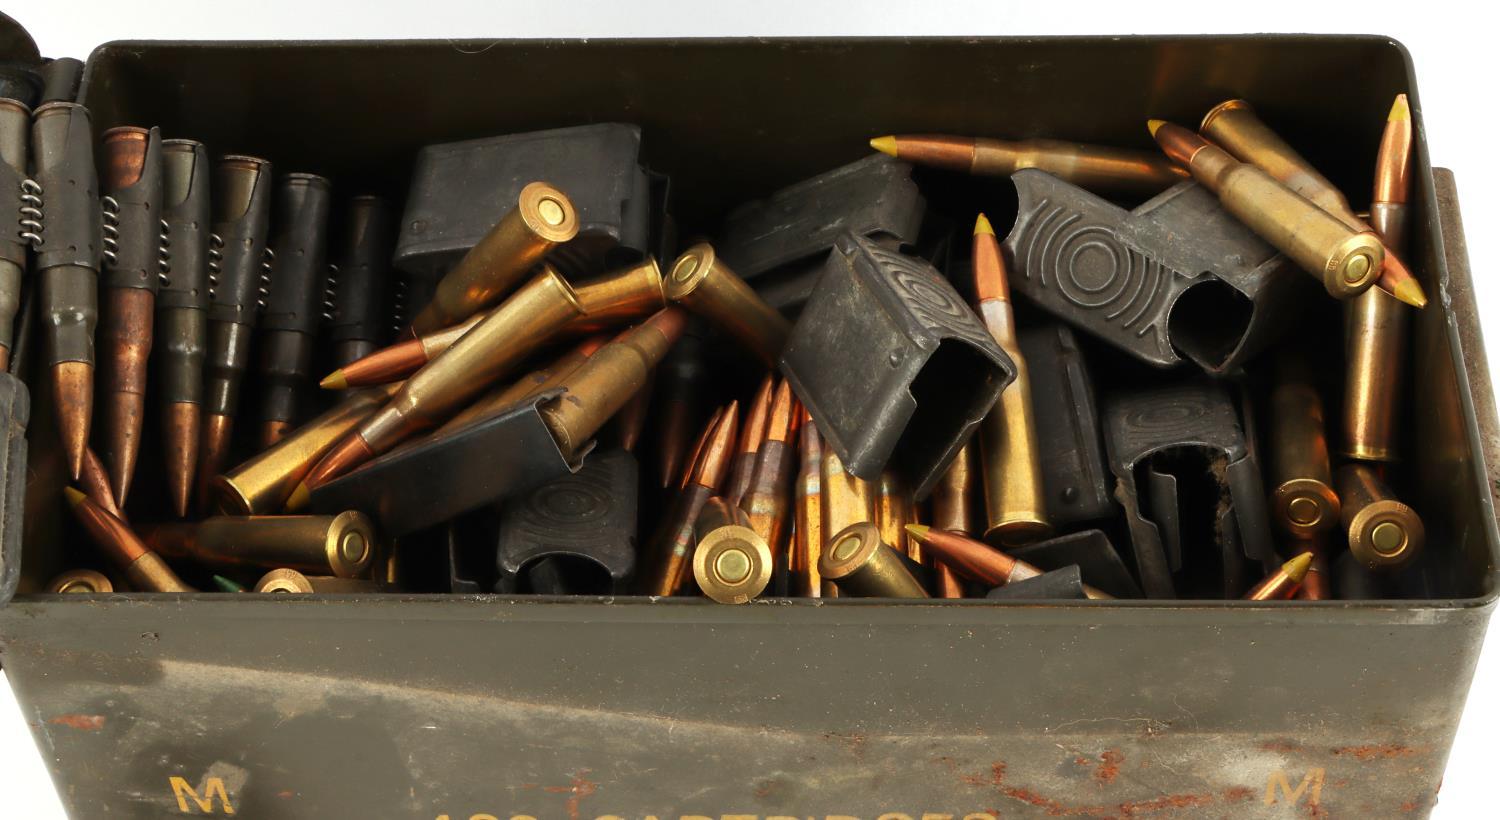 AMMO BOX OF M1 CLIPS & 30-06 ROUNDS & HK21 BELTS